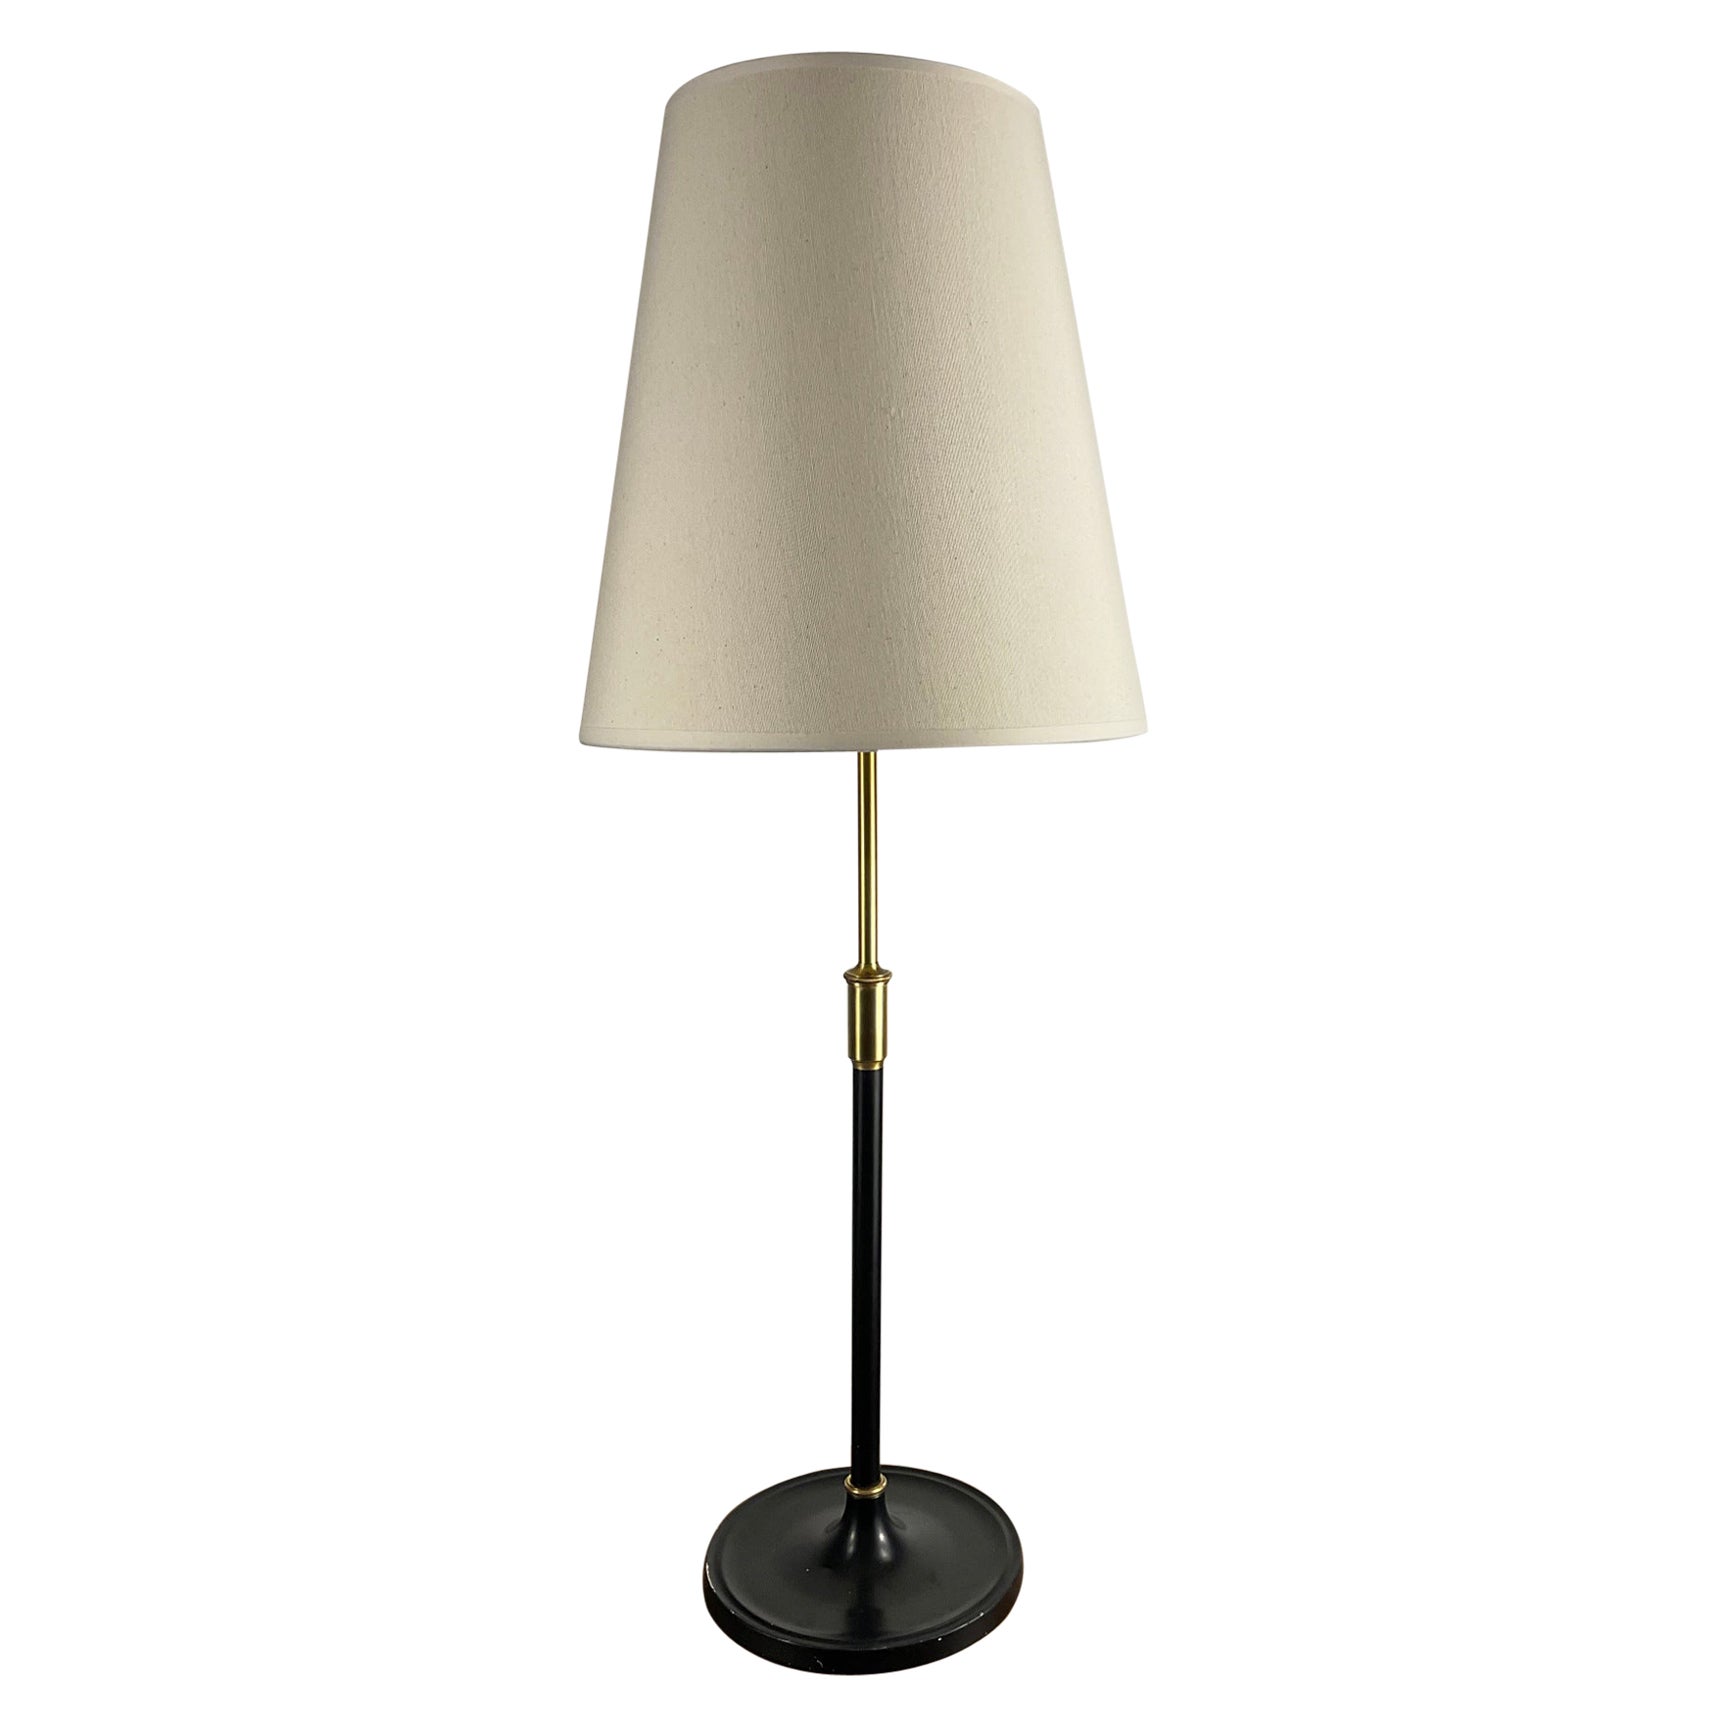 1950s Danish Table Lamp Designed by Aage Petersen Manufactured by Le Klint